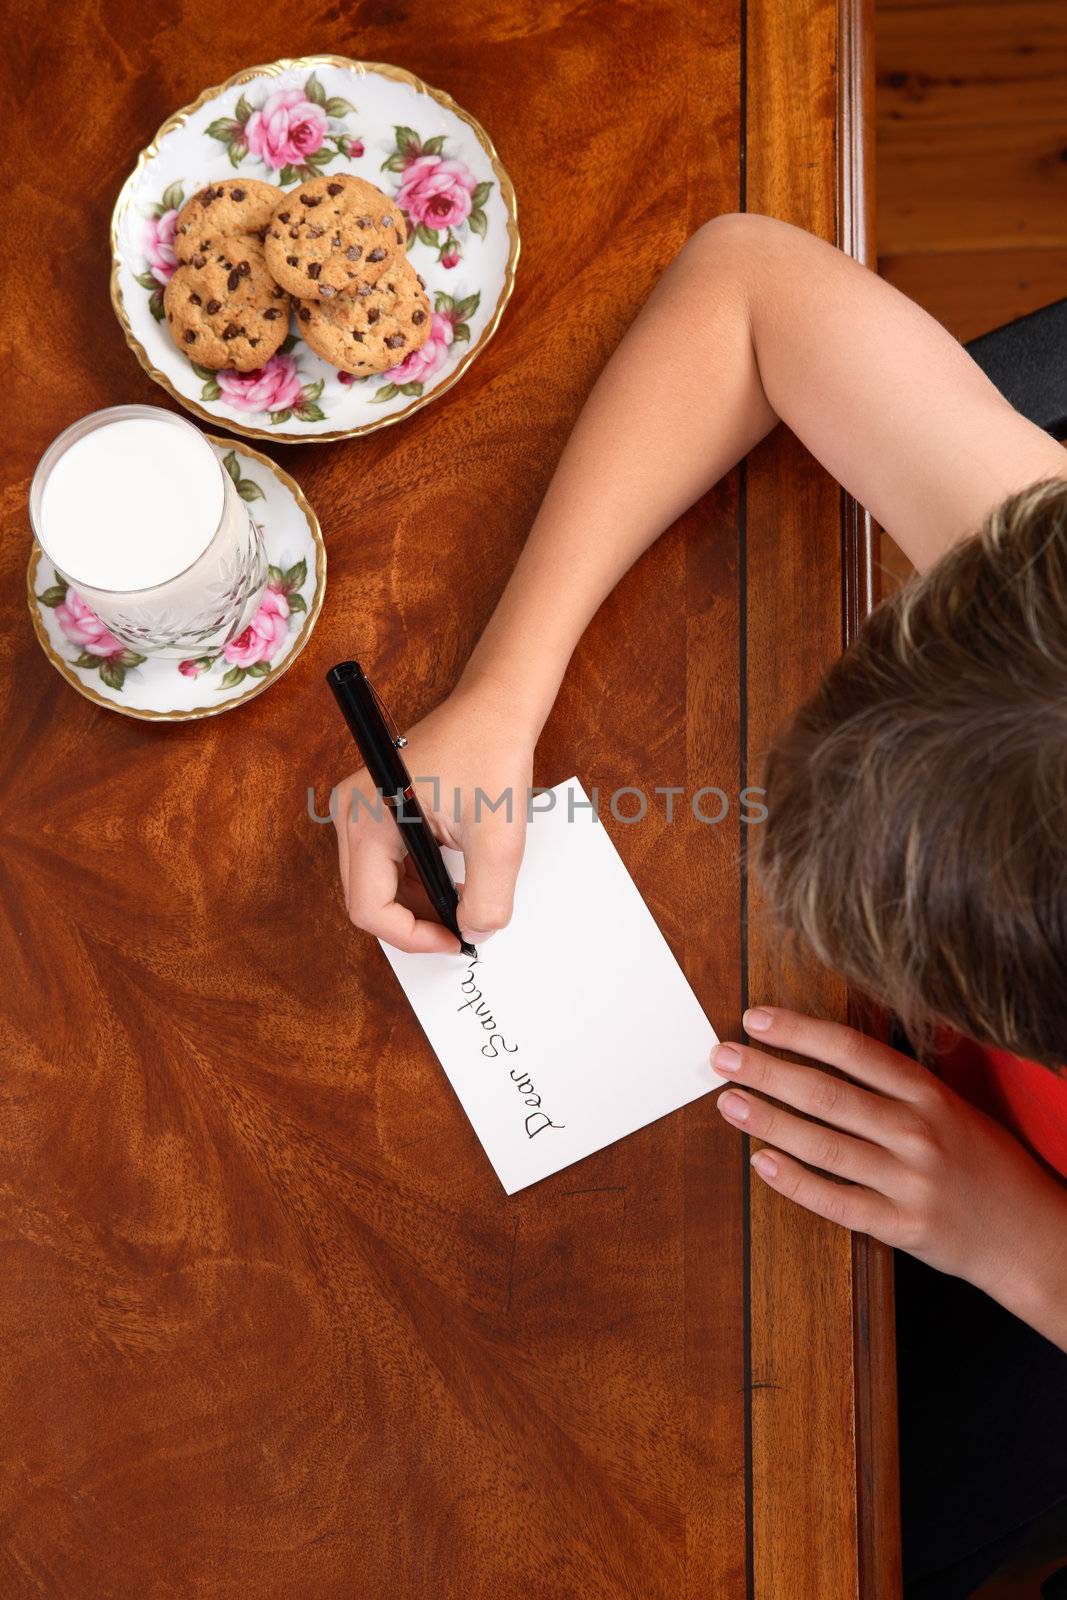 A child at desk writing a letter to Santa Claus, beside him a plate of choc chip cookies and glass of milk.